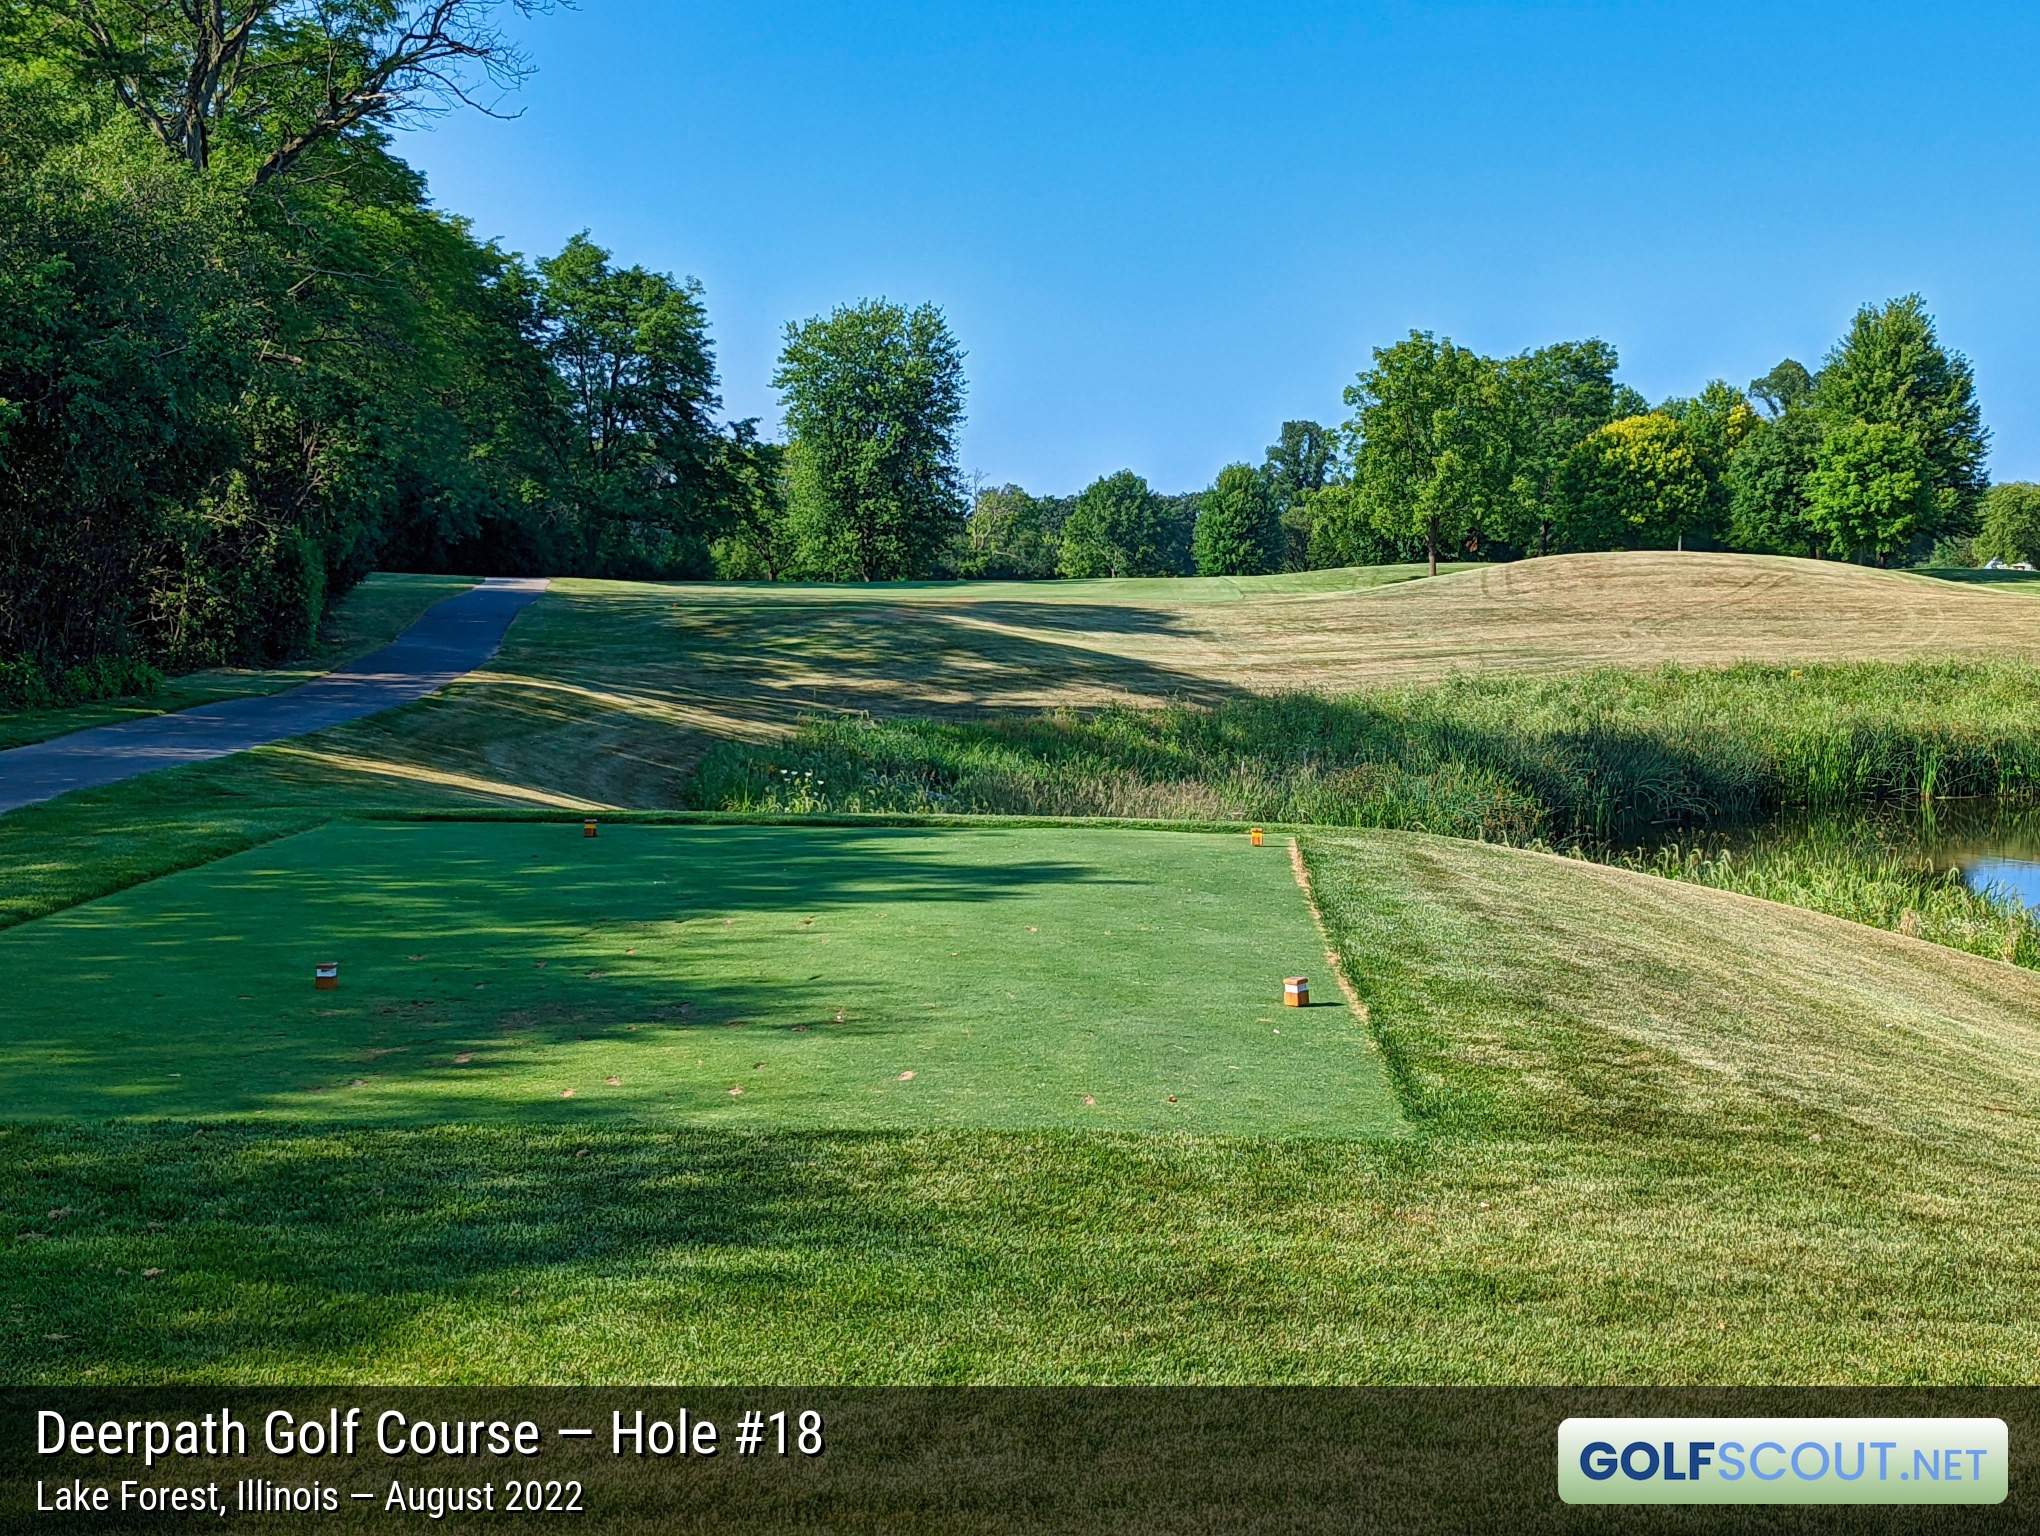 Photo of hole #18 at Deerpath Golf Course in Lake Forest, Illinois. 